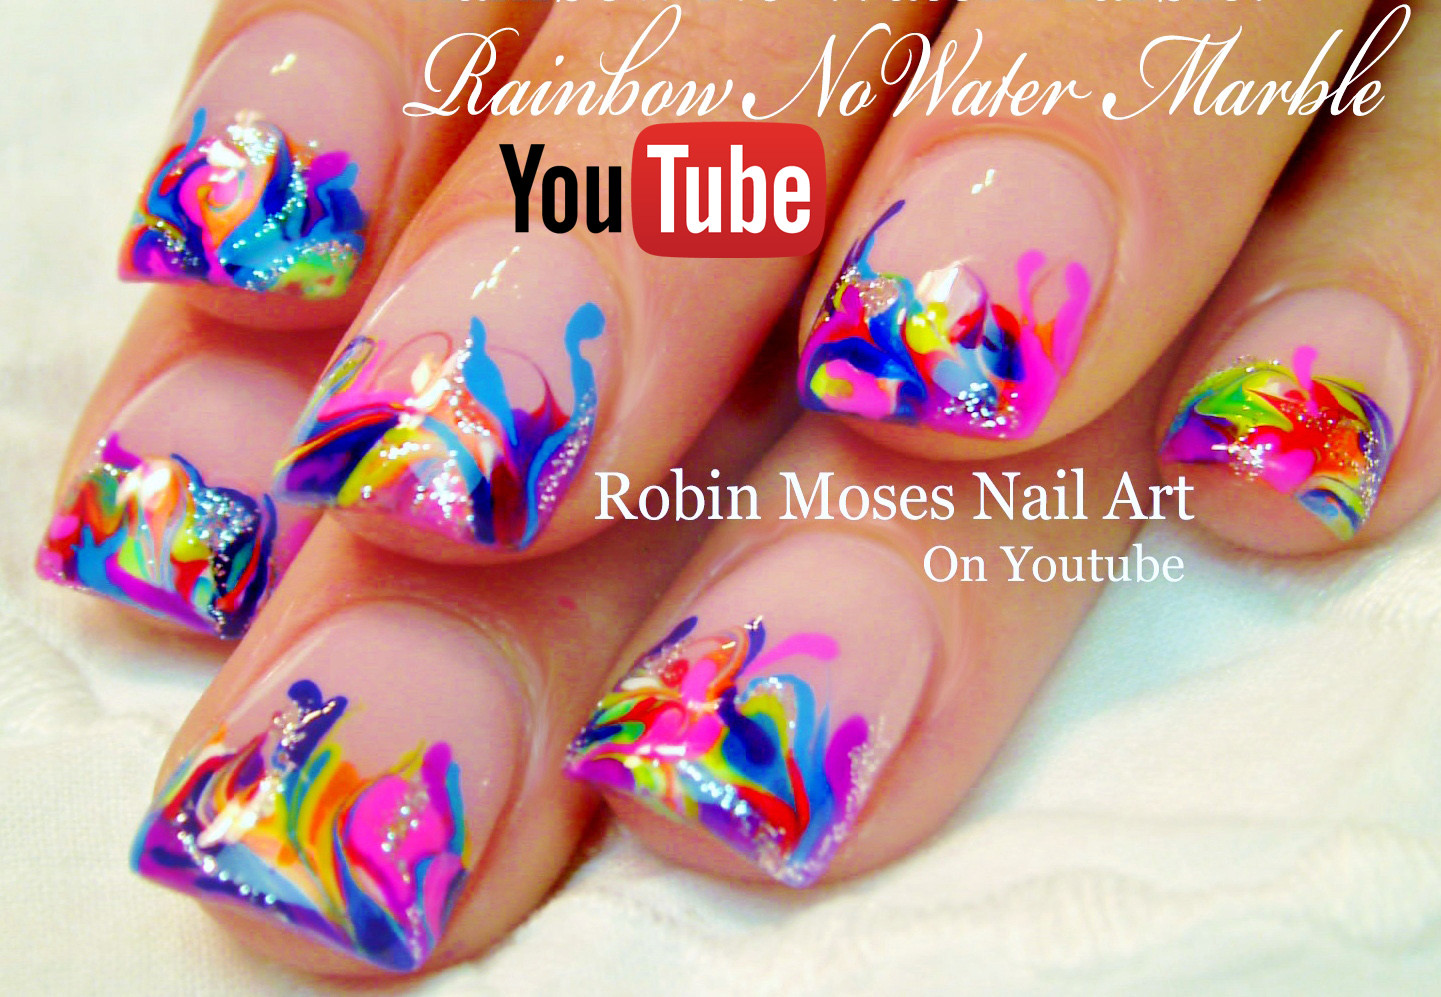 Robin Moses Nail Art Brushes - Yahoo Search Results - wide 2